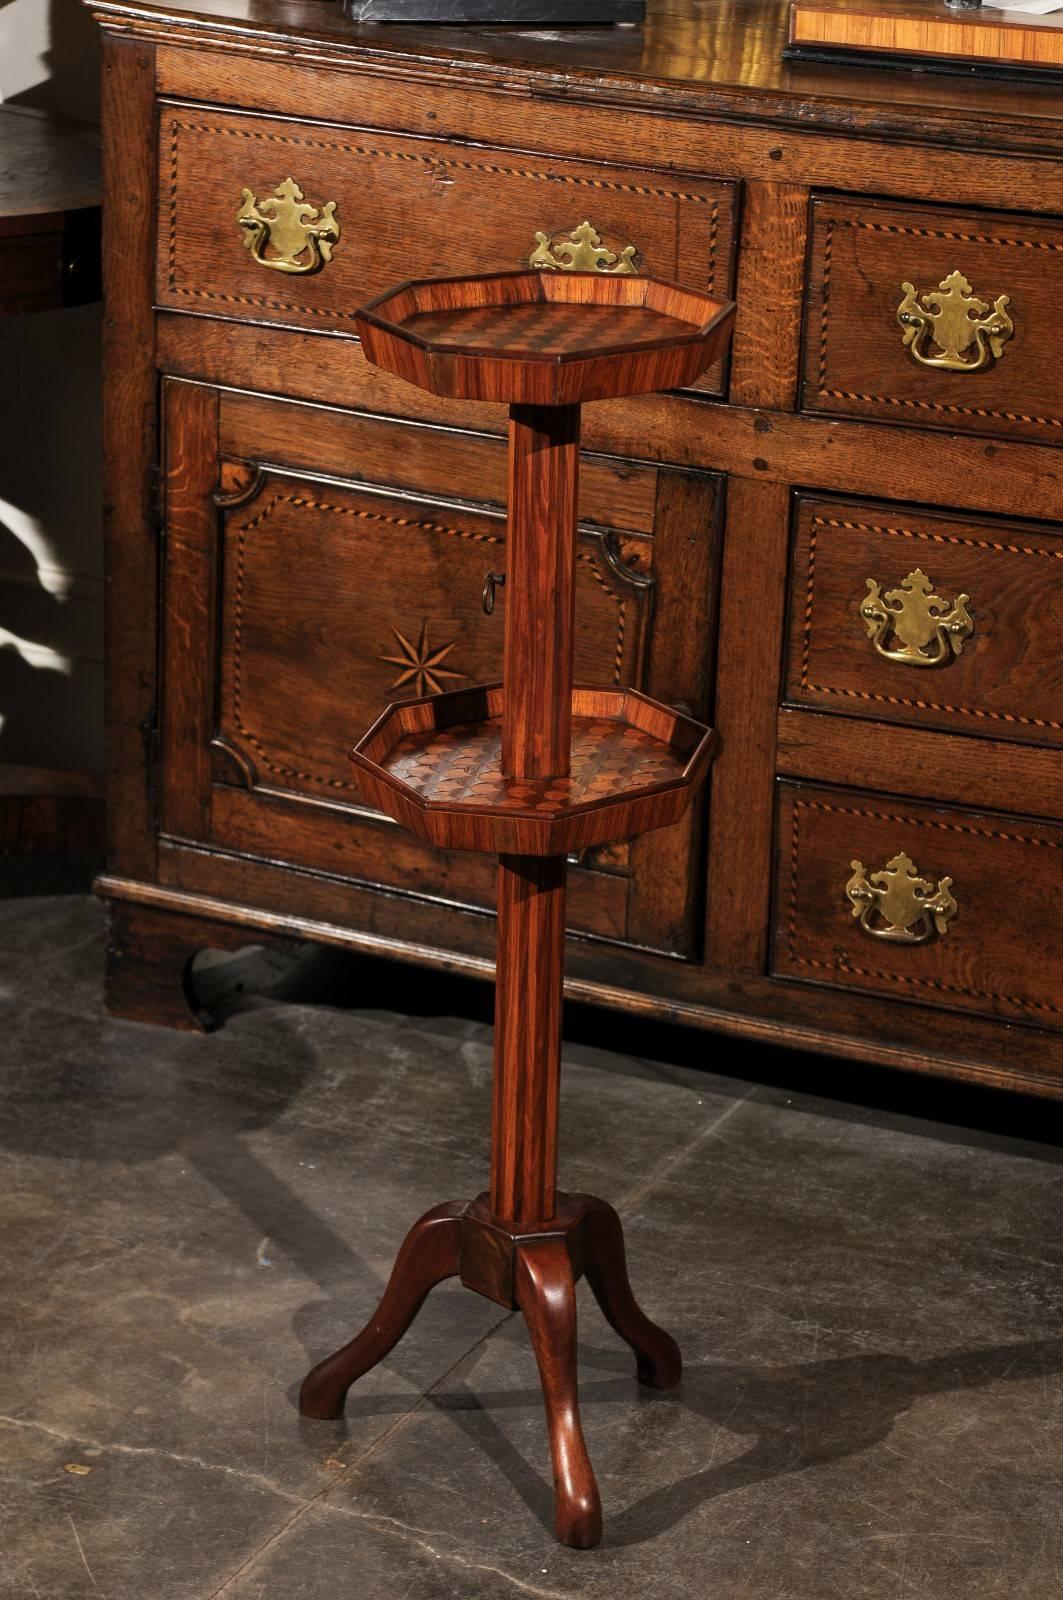 Adjustable French wooden dumb waiter/pedestal stand from the late 19th century. This stand from circa 1880 is a French example of a piece of furniture that developed in England in the early 18th century, the dumb waiter. The pieces were early